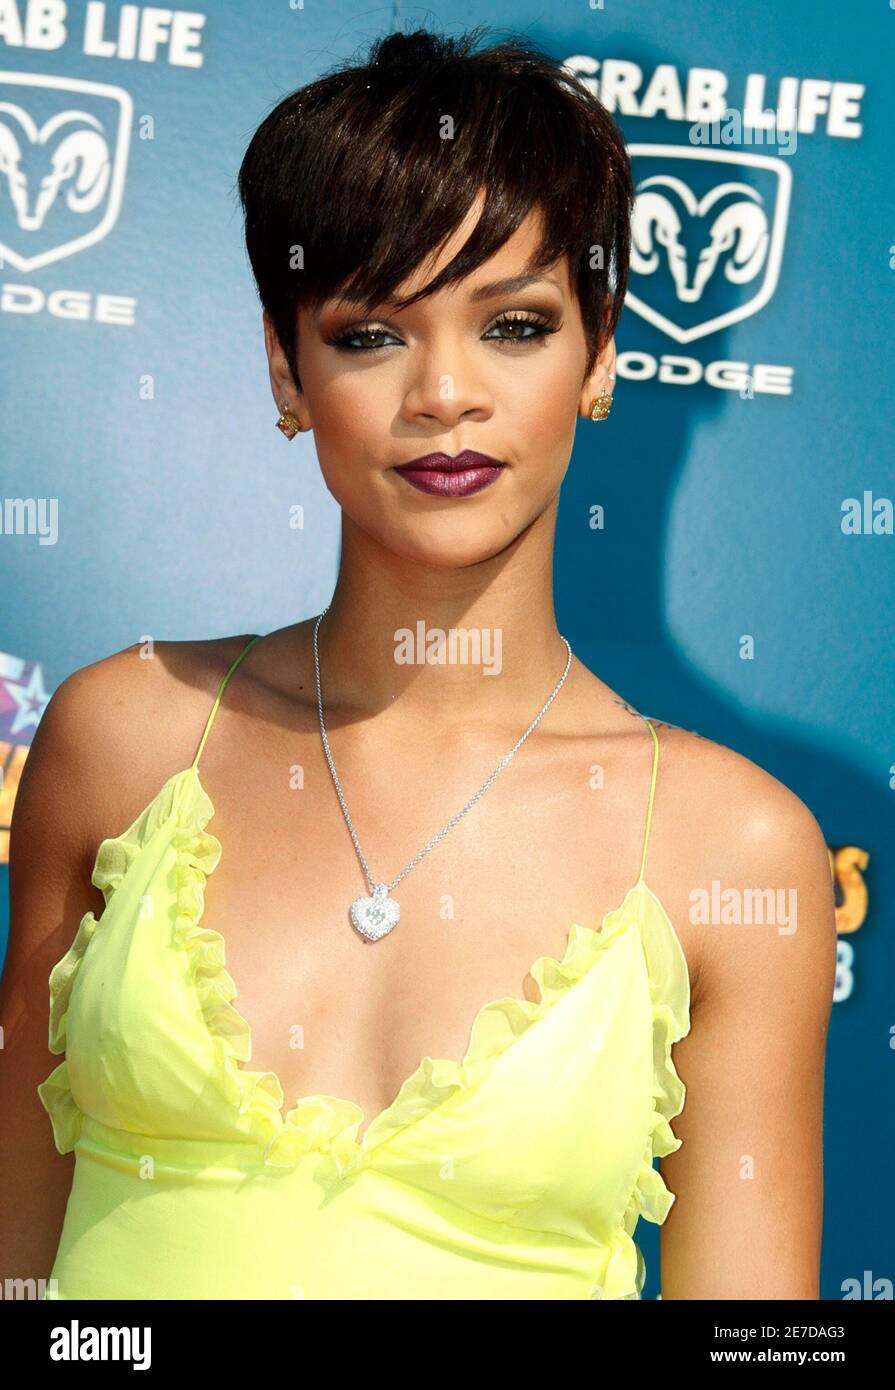 Singer Rihanna arrives at the 2008 BET Awards in Los Angeles June 24, 2008.     REUTERS/Fred Prouser (UNITED STATES) Stock Photo